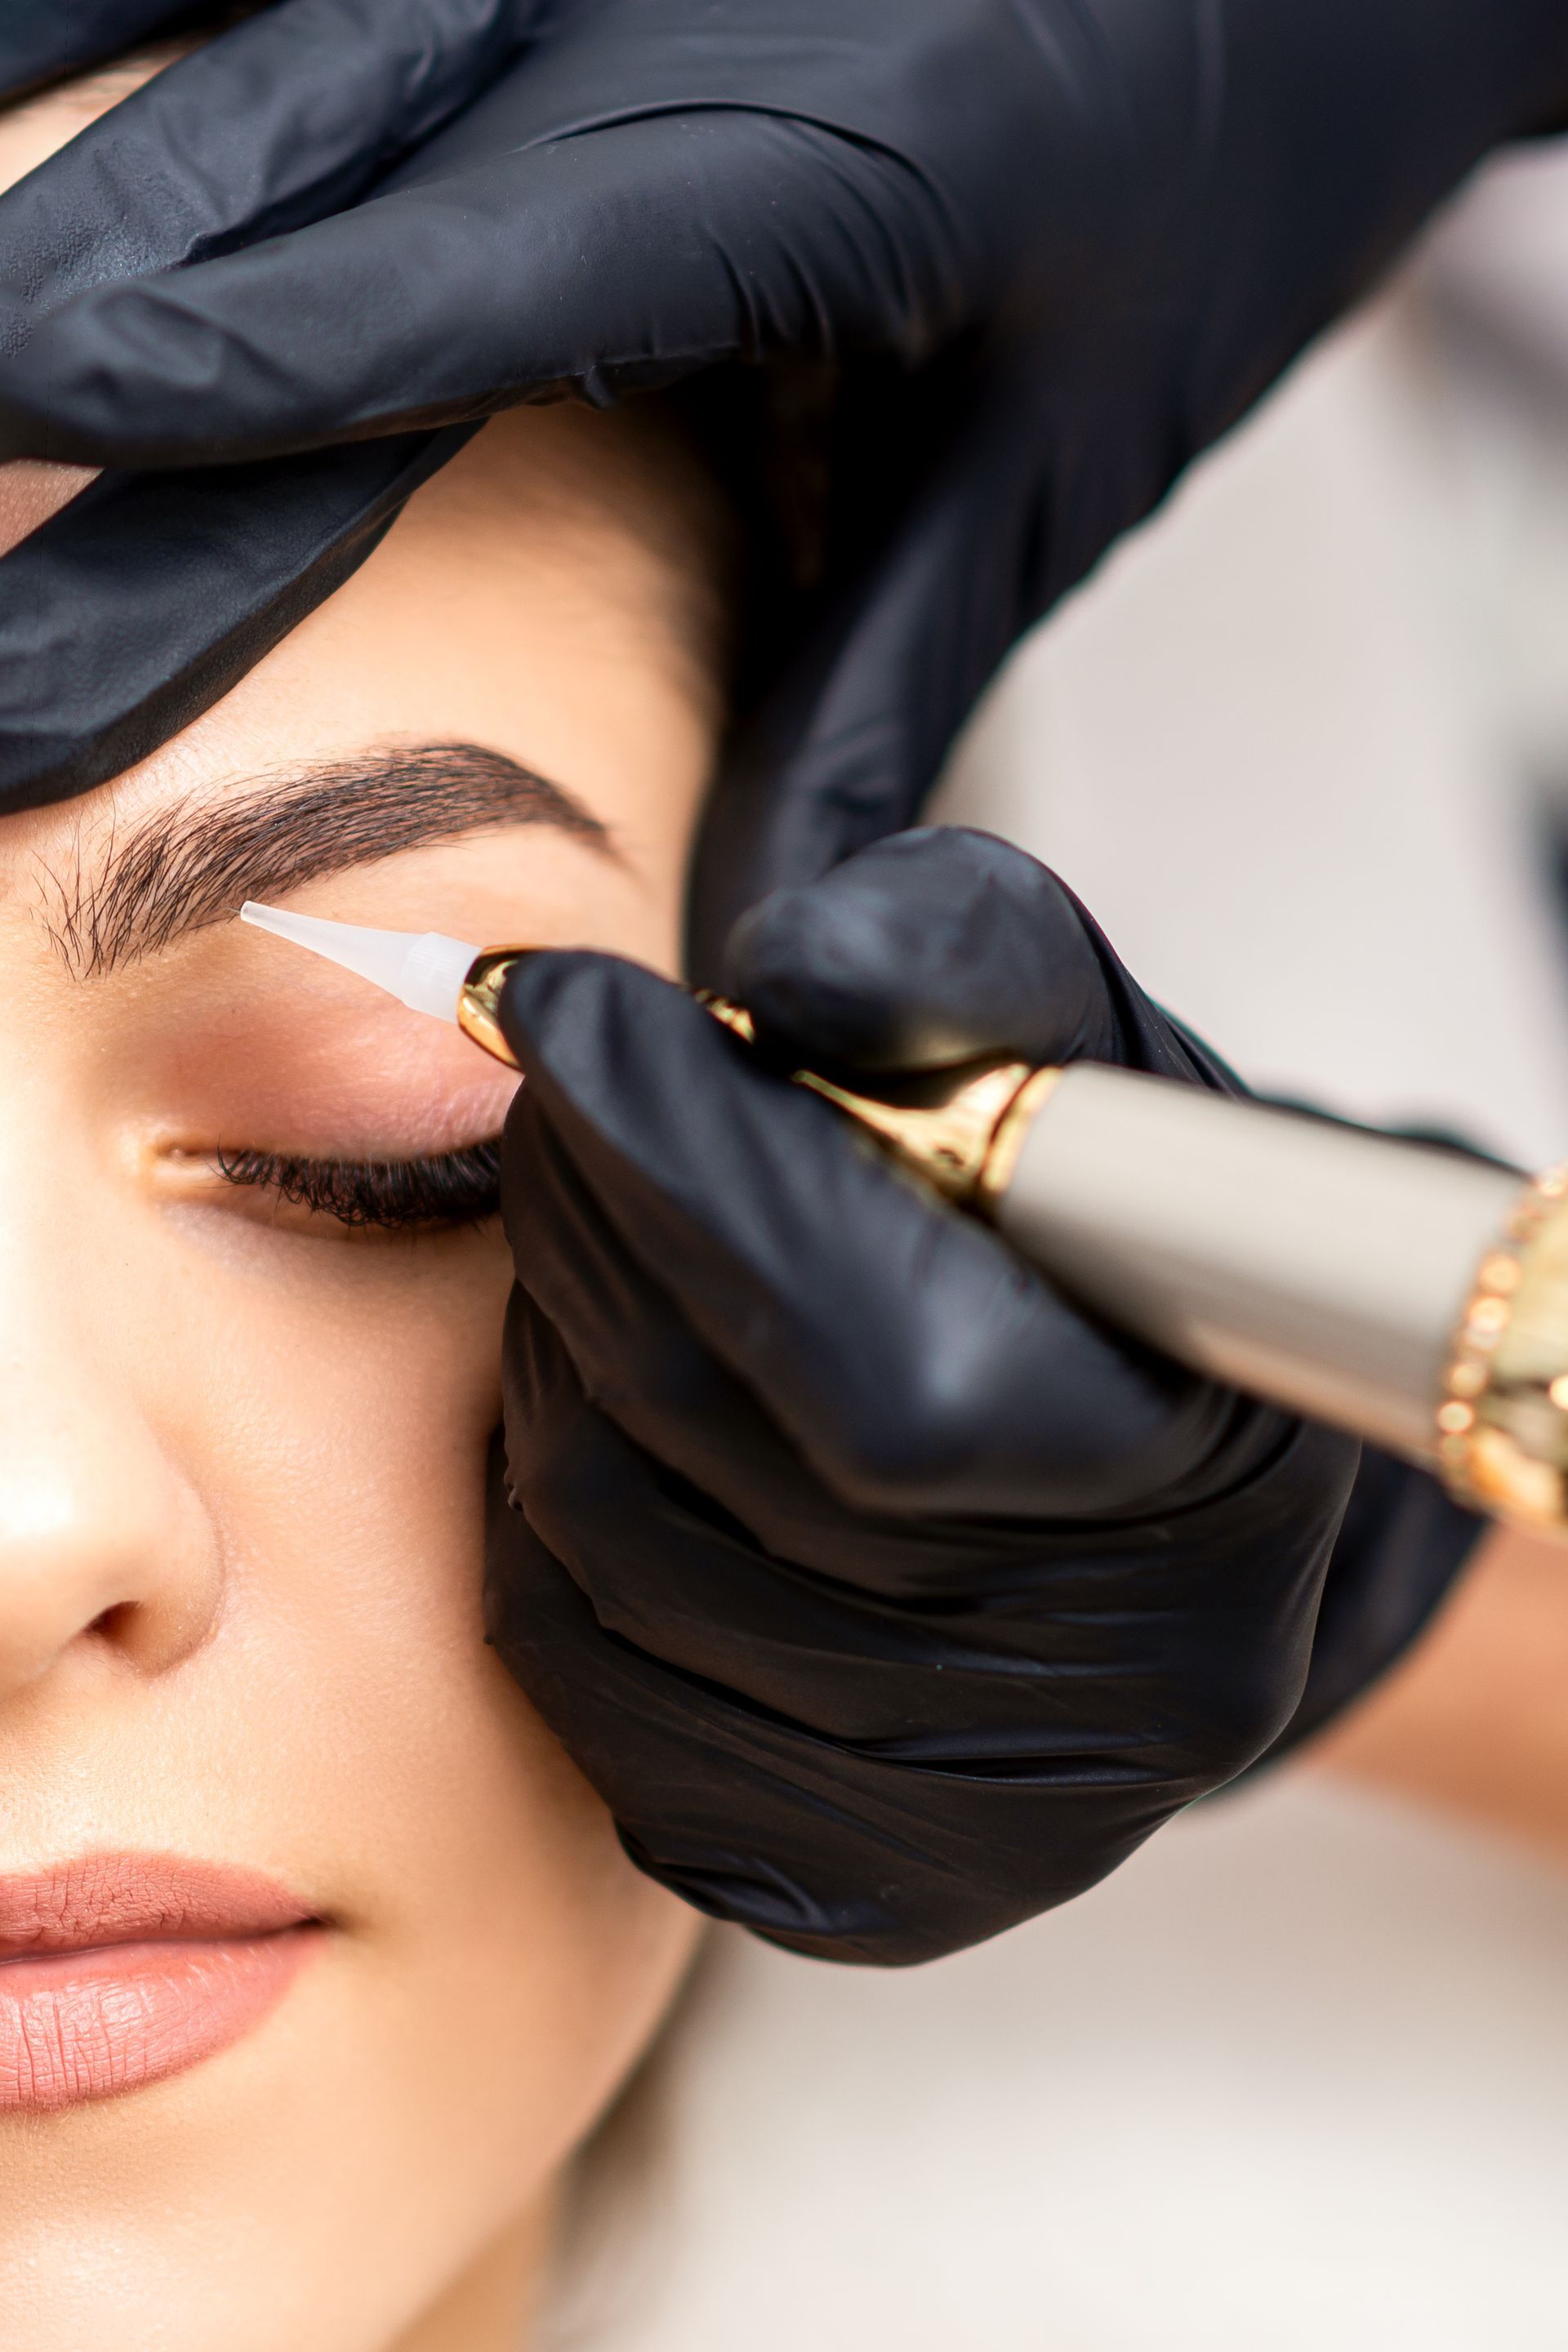 a woman has her eyebrows tattooed by a person wearing black gloves